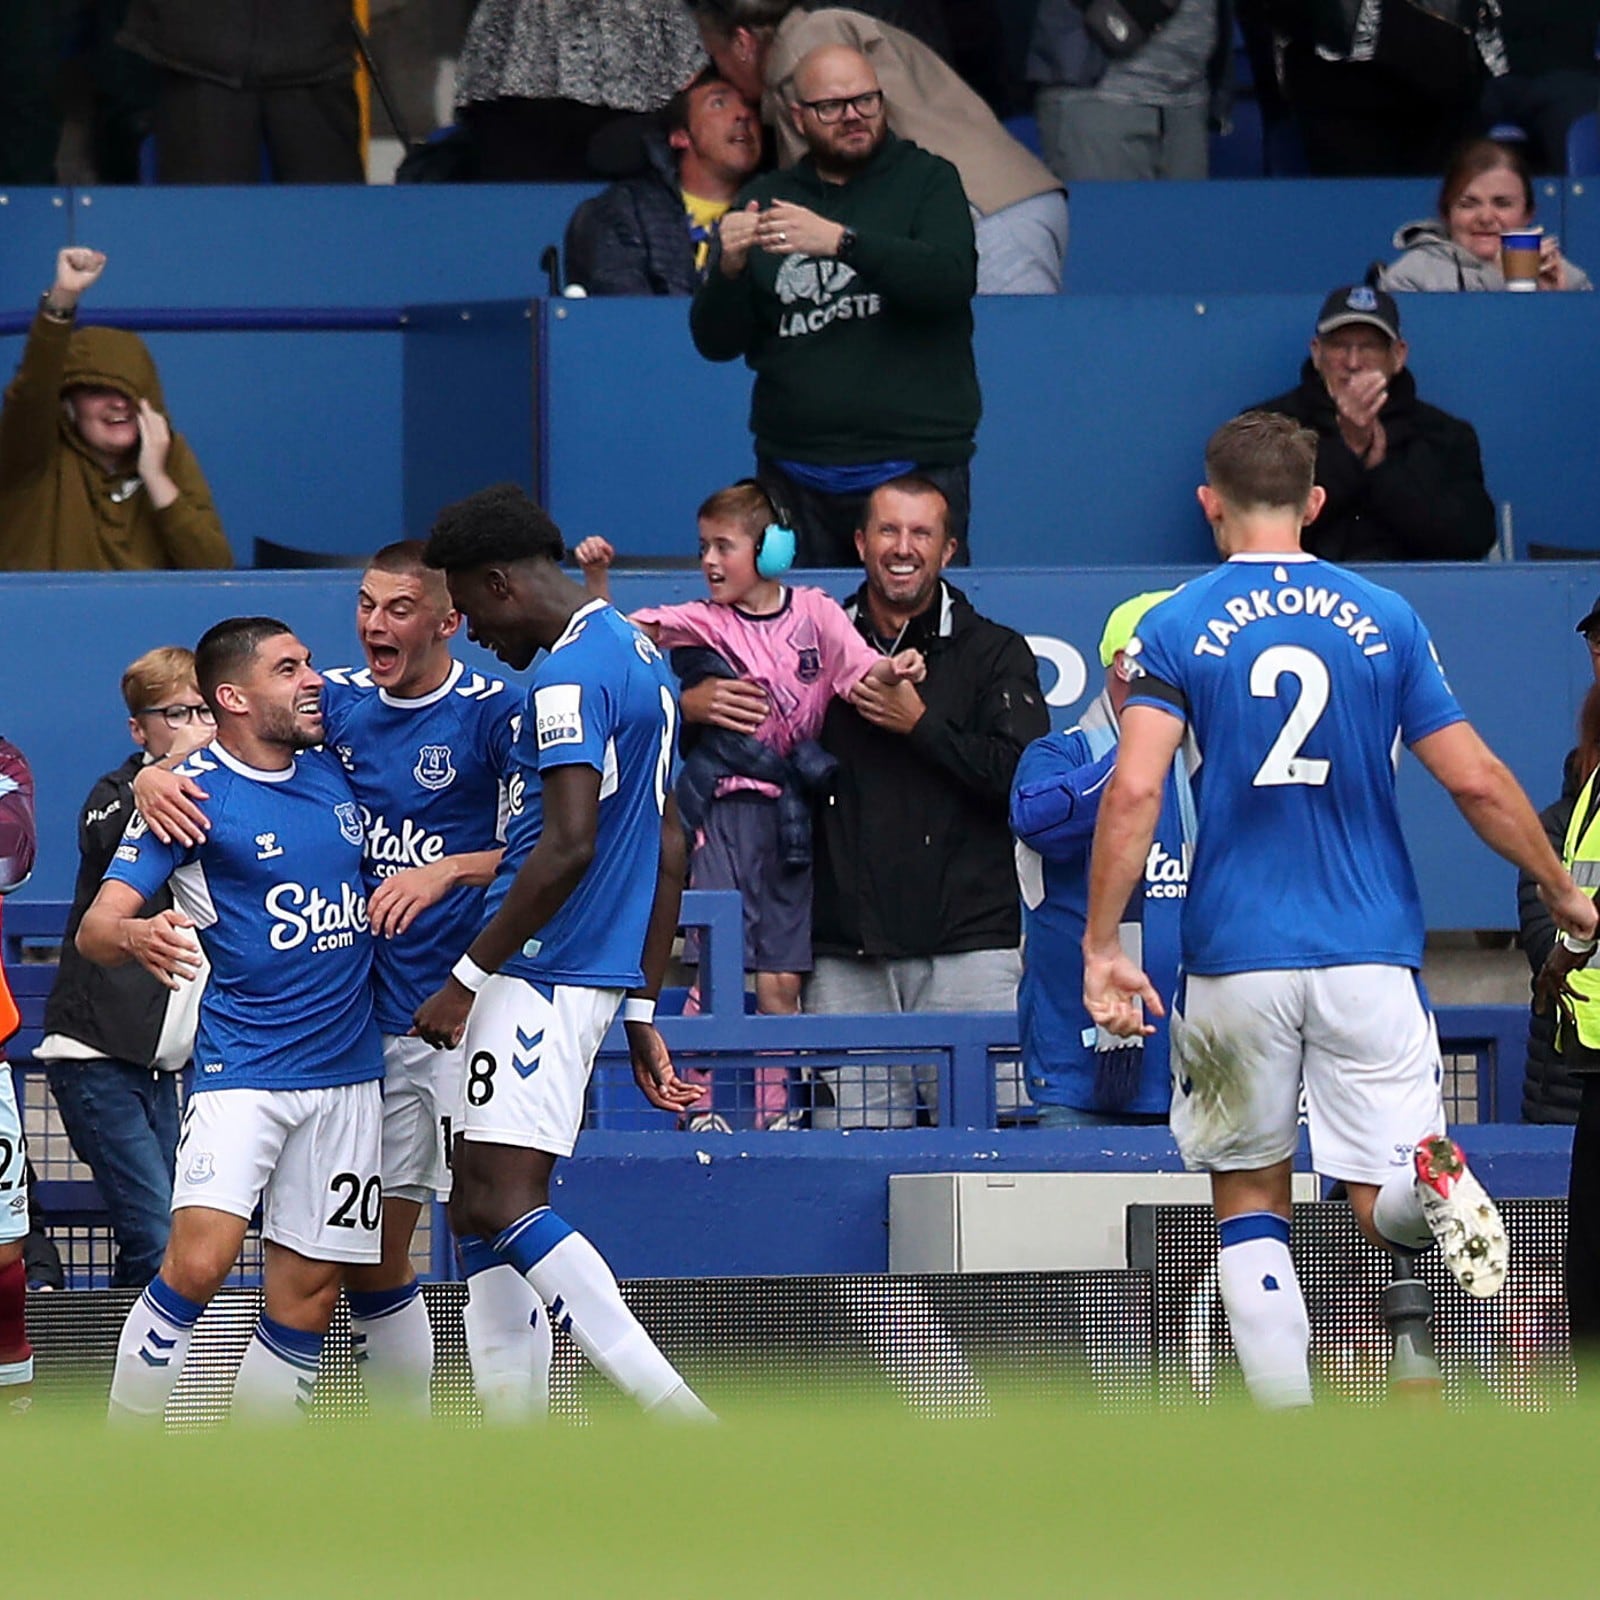 Premier League Everton Defeat West Ham 1-0 to Register First Win of The Season